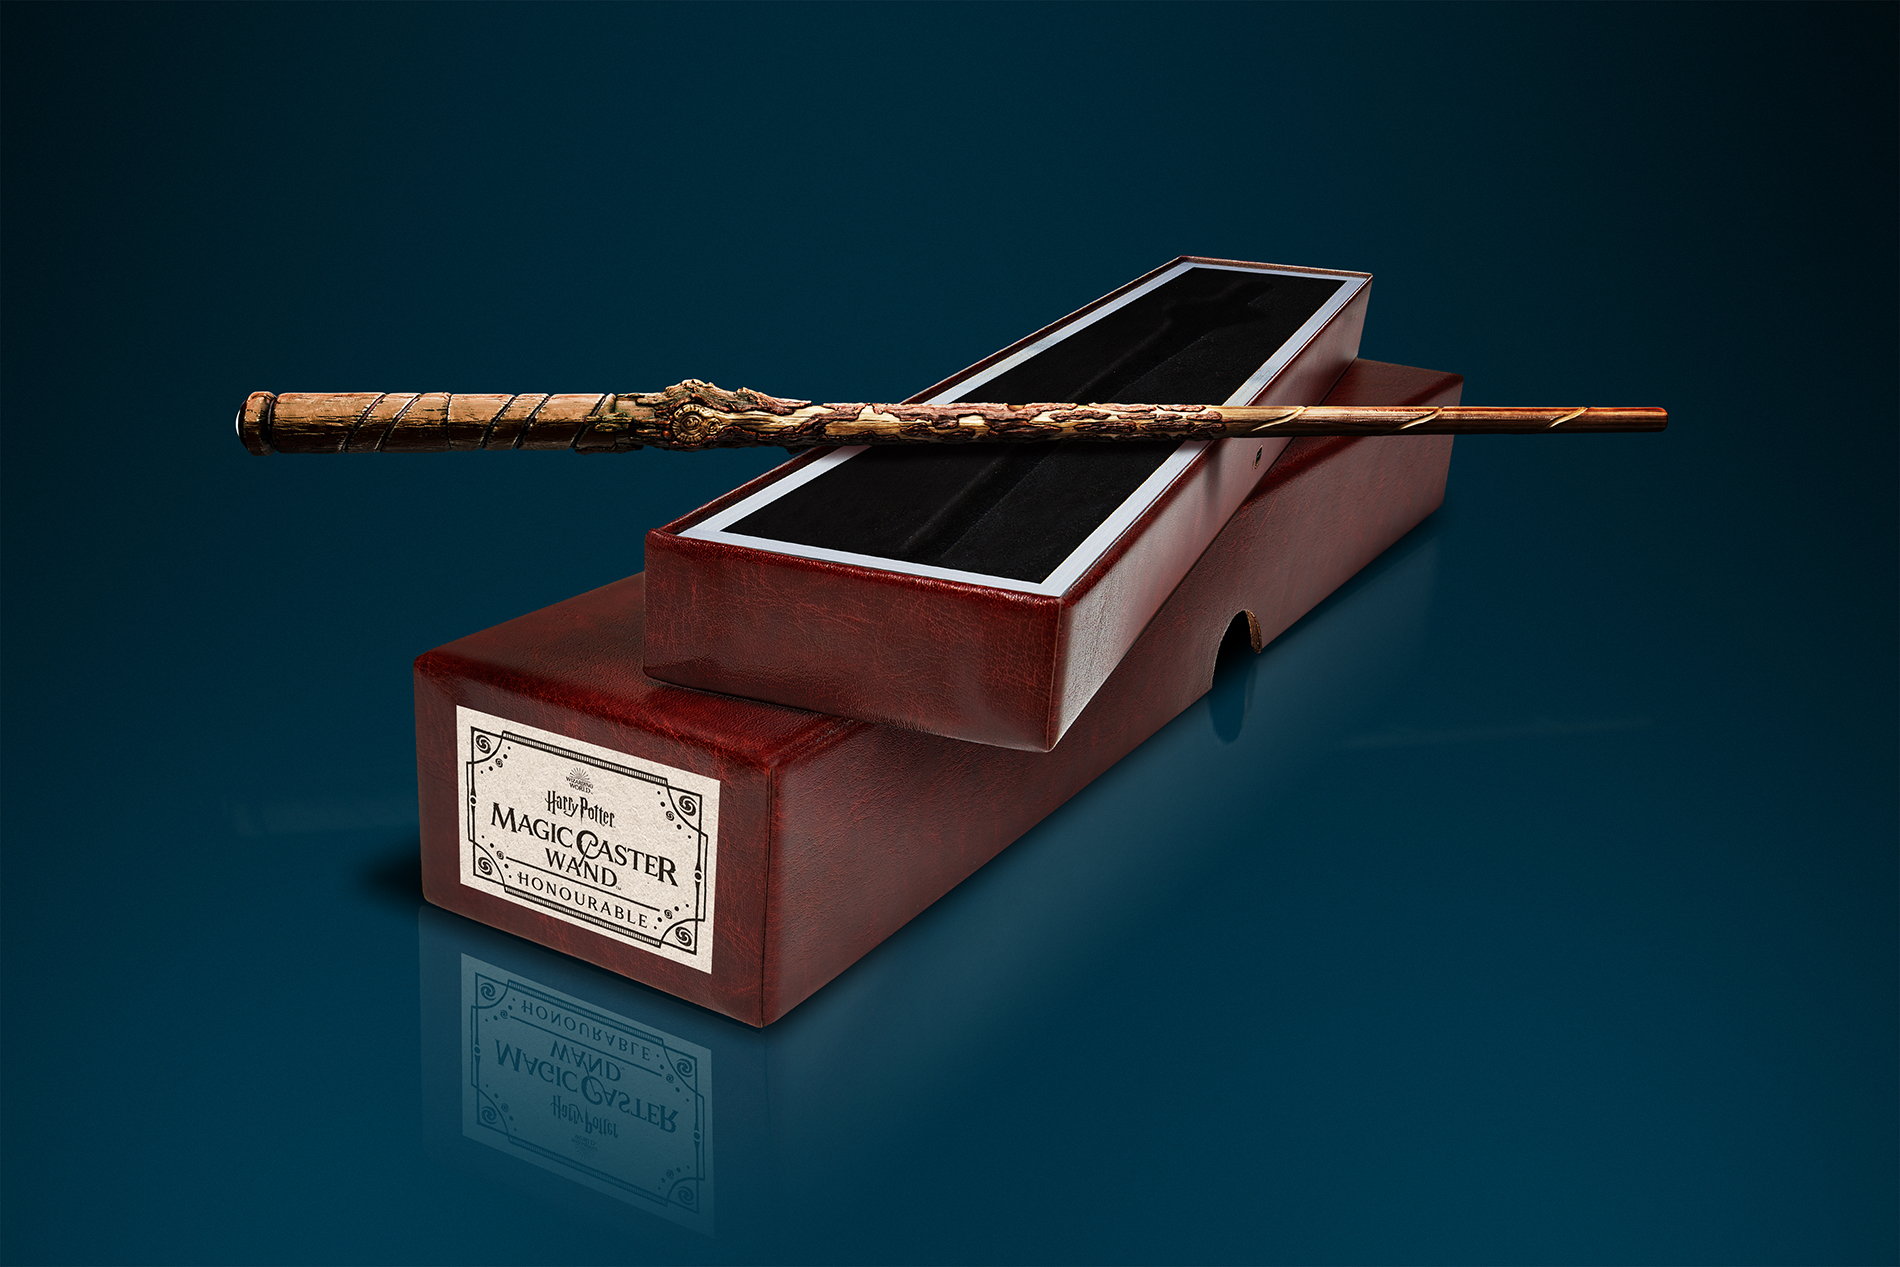 Harry Potter: Magic Caster Wand now available